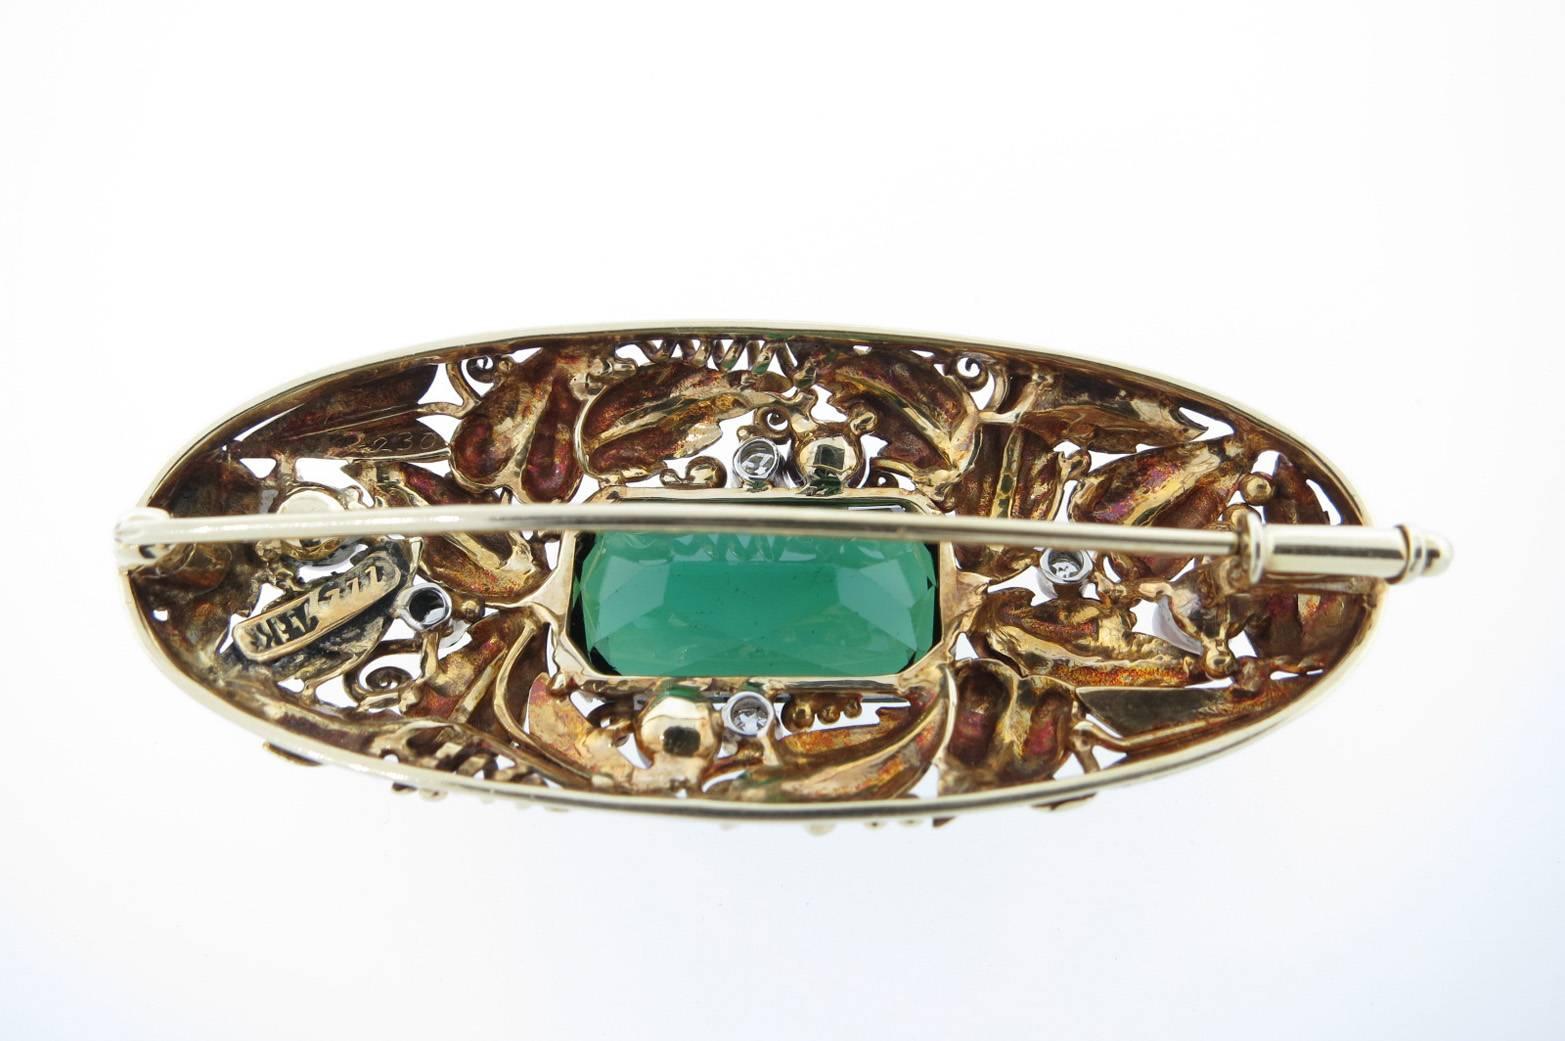 Exceptional condition brooch dating from the Arts and Crafts period circa  1900 measuring 2 inches in length.The center is prong set with a faceted natural green tourmaline weighing approx 3.75 cts. The organic foliate design frame is mill-grained